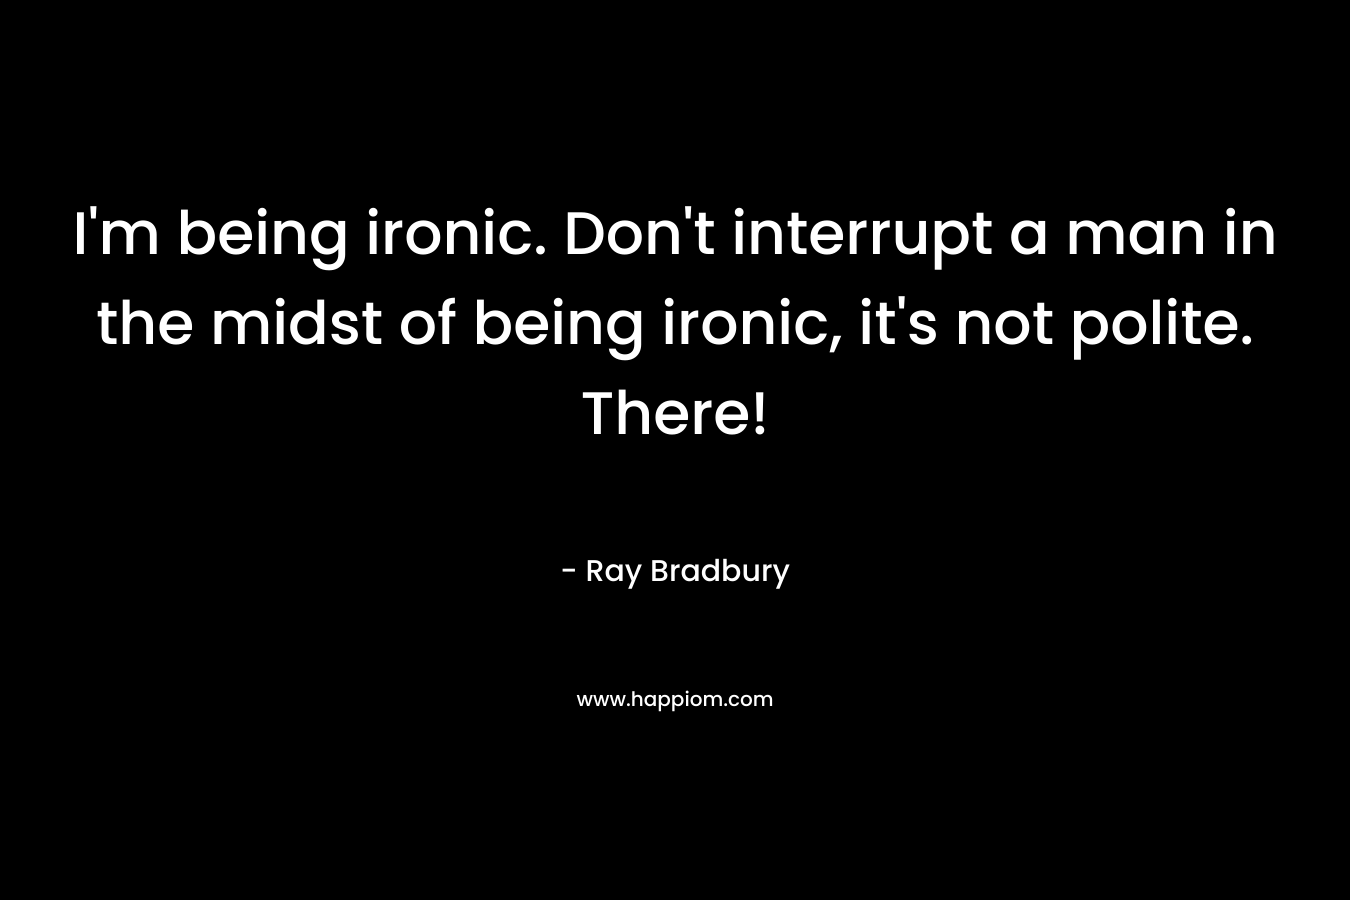 I'm being ironic. Don't interrupt a man in the midst of being ironic, it's not polite. There!